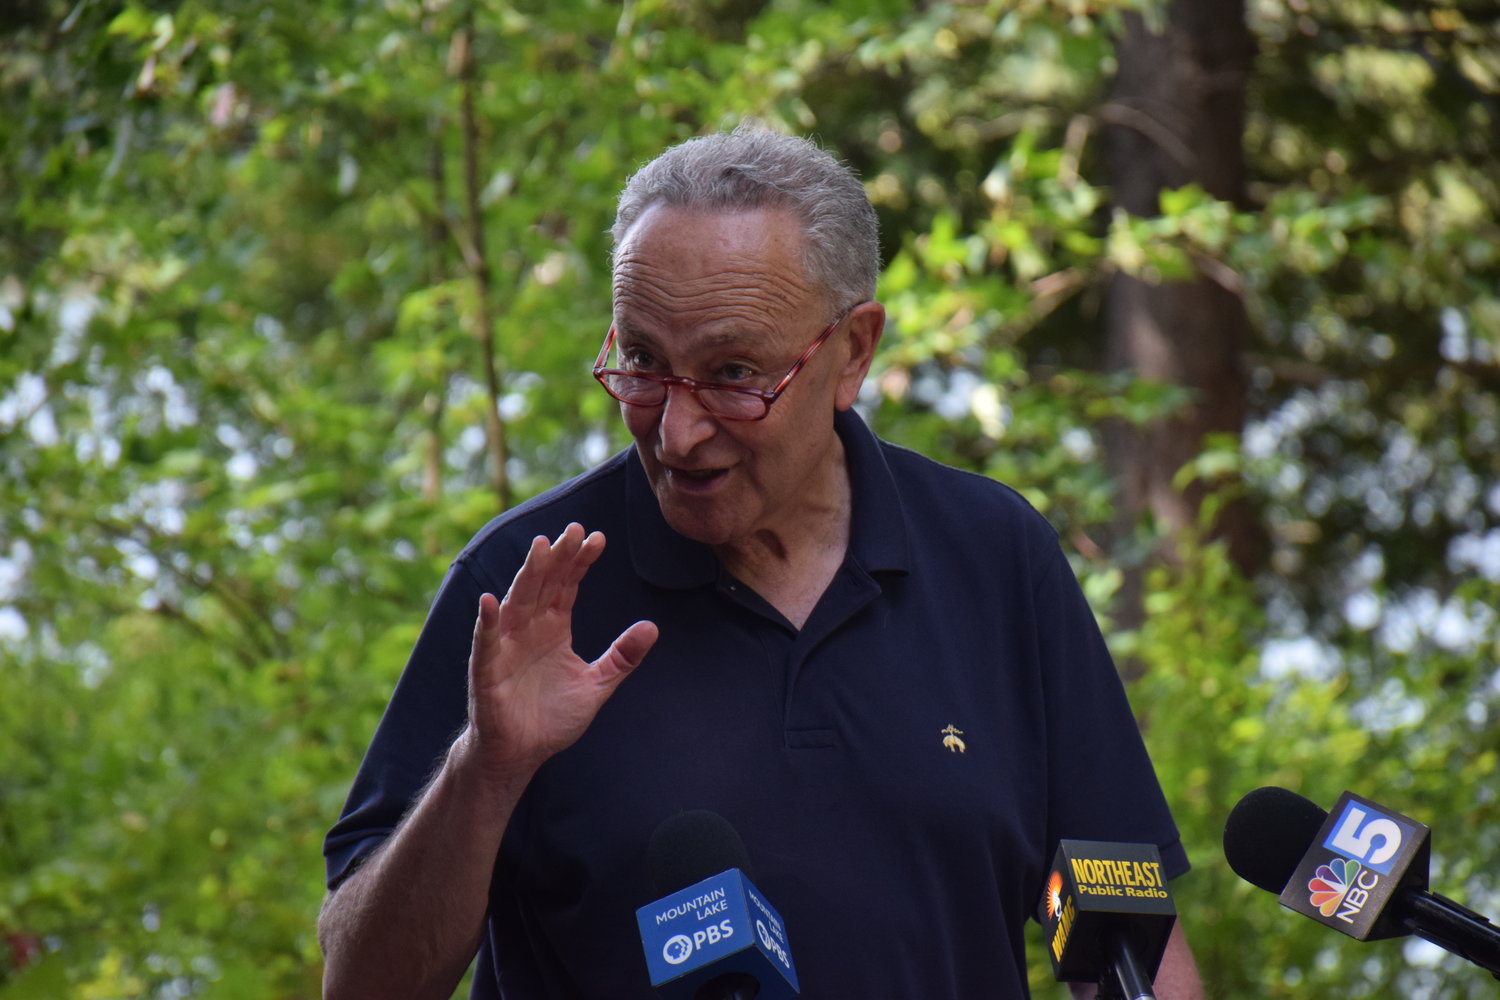 U.S. Sen. Chuck Schumer discusses the Inflation Reduction Act of 2022 at Heart Lake in Lake Placid on Monday, specifically highlighting how the act could benefit the climate and economy in the Adirondacks.